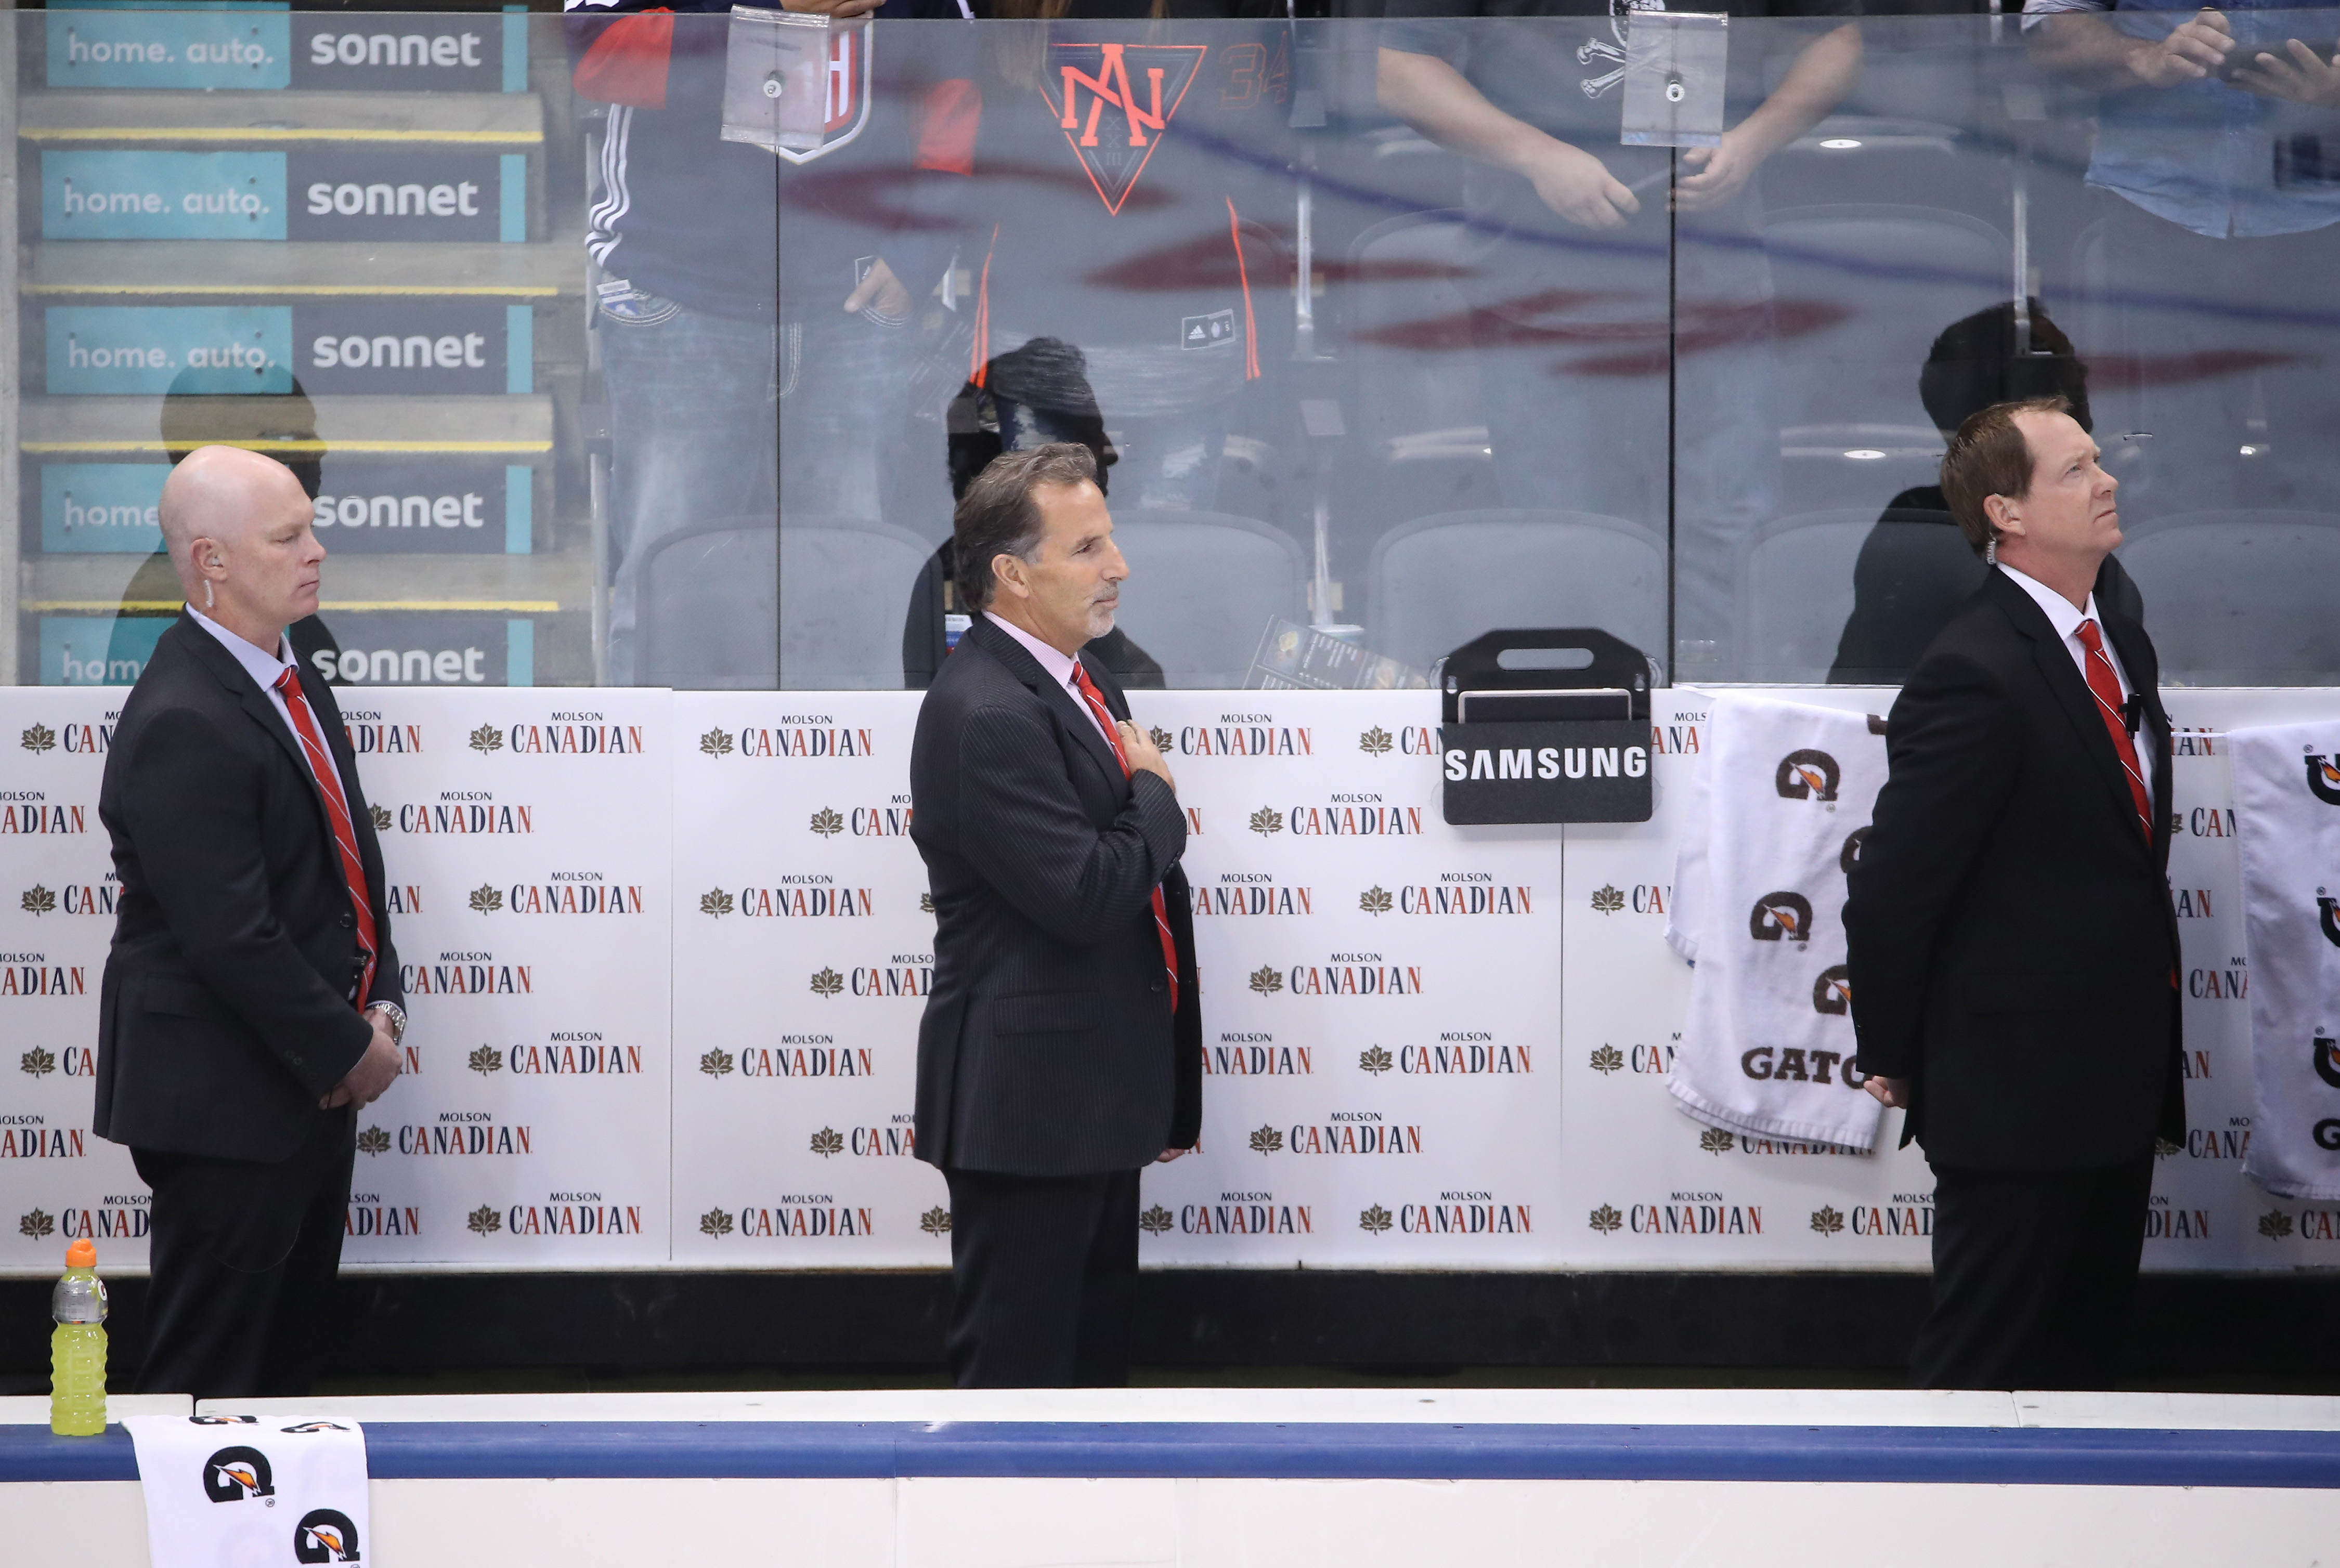 TORONTO, ON - SEPTEMBER 22: Assistant coach John Hynes of Team USA and head coach John Tortorella and assistant coach Phil Housley stand for the playing of the American national anthem before playing against Team Czech Republic during the World Cup of Hockey tournament at the Air Canada Centre on September 22, 2016 in Toronto, Canada. (Photo by Tom Szczerbowski/Getty Images)